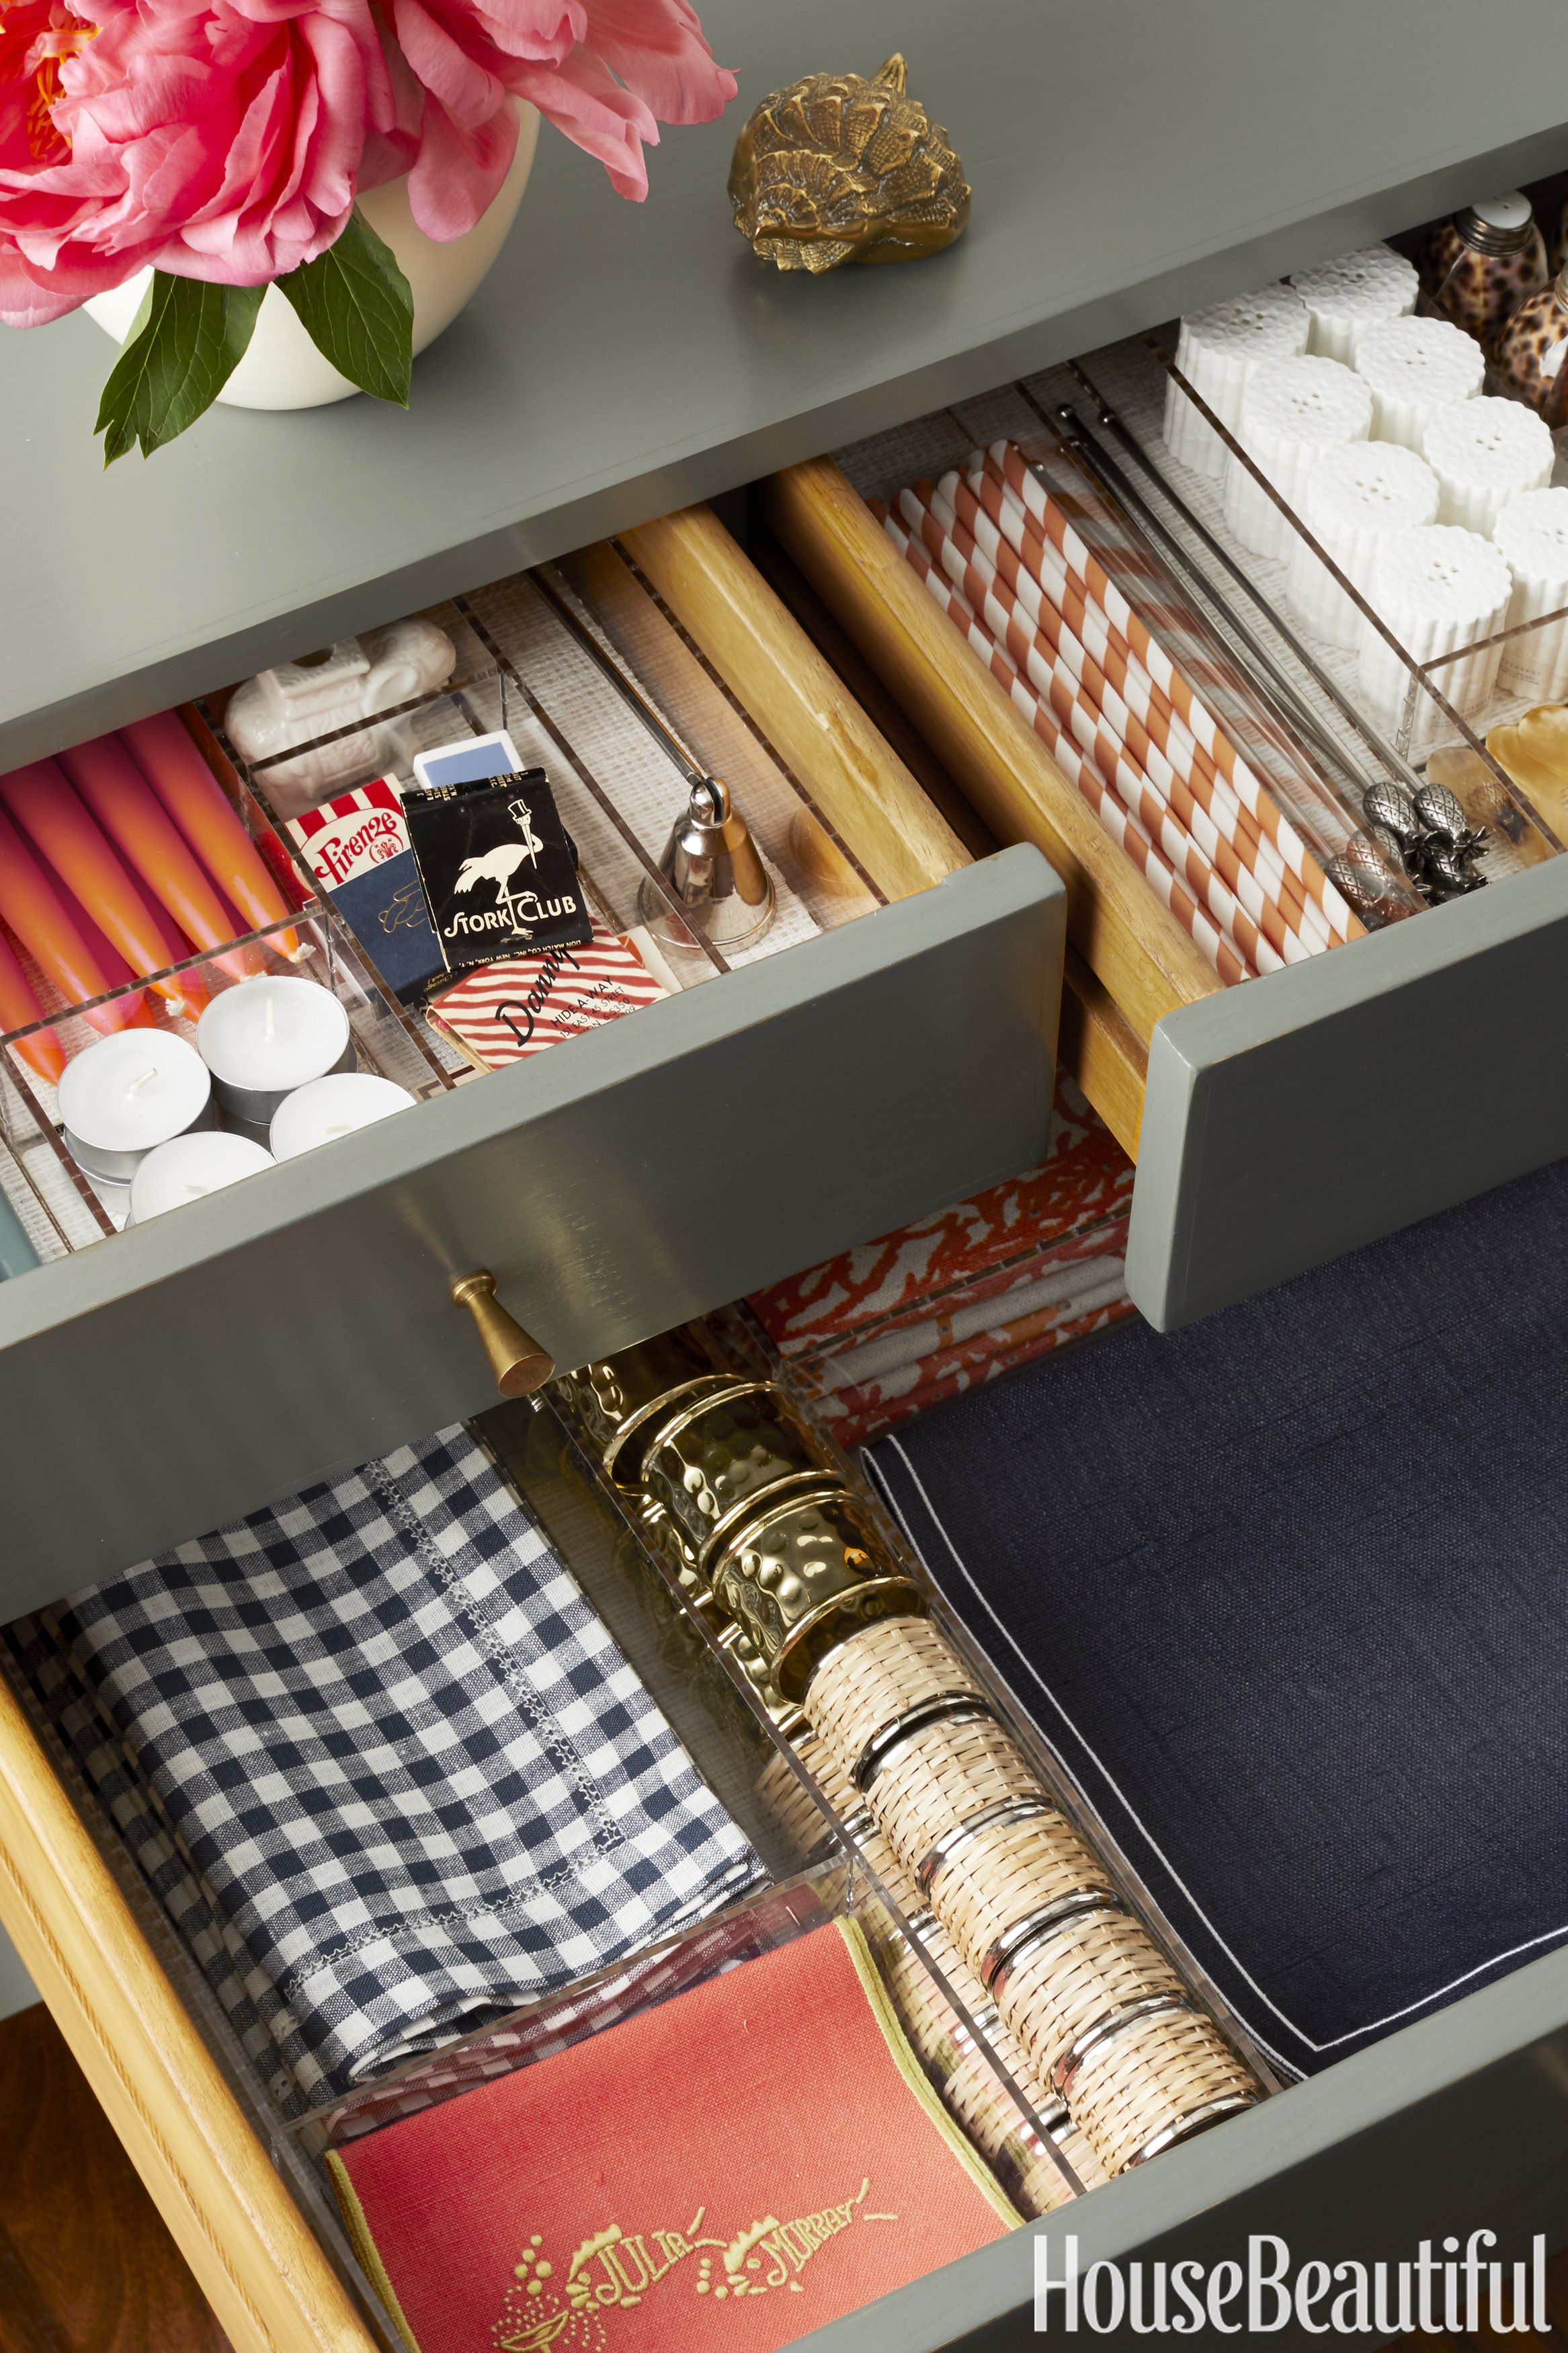 20 Best Home Organizers - High End Organizers for Drawers